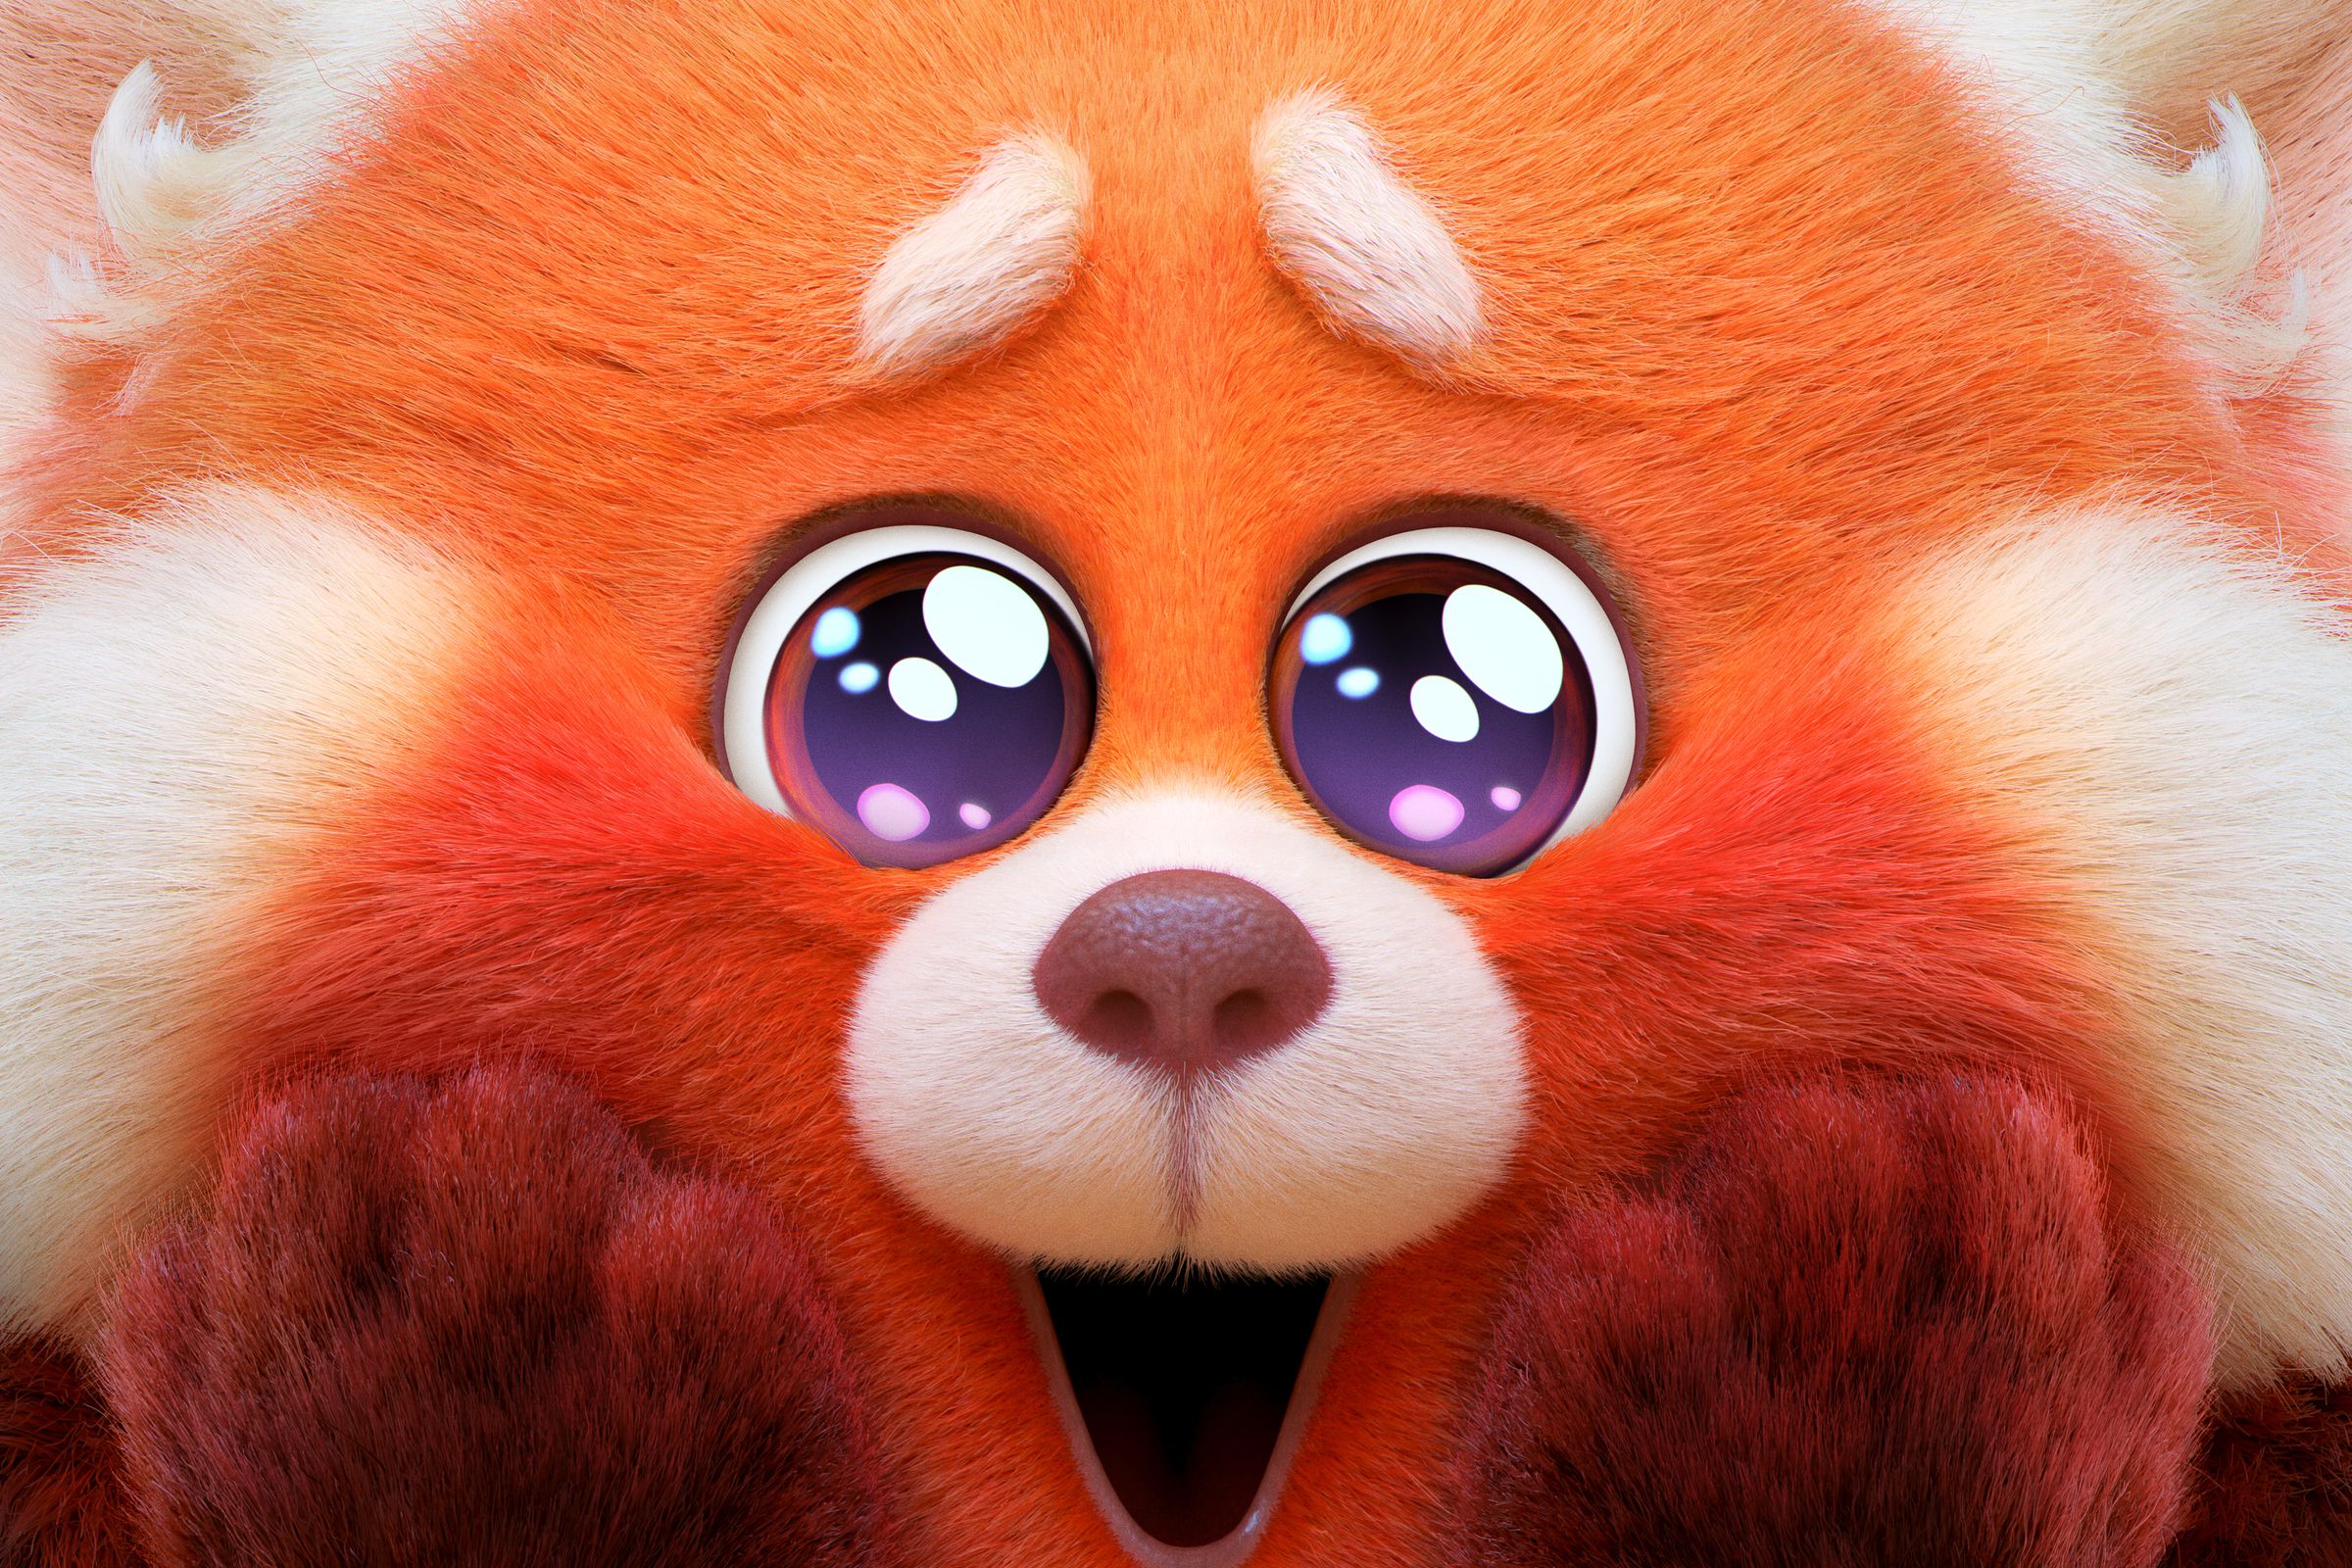 A close up shot of an anthropomorphic red panda standing on its hind legs, and squishing its face together with its paws as it expresses excitement about something it’s looking at.